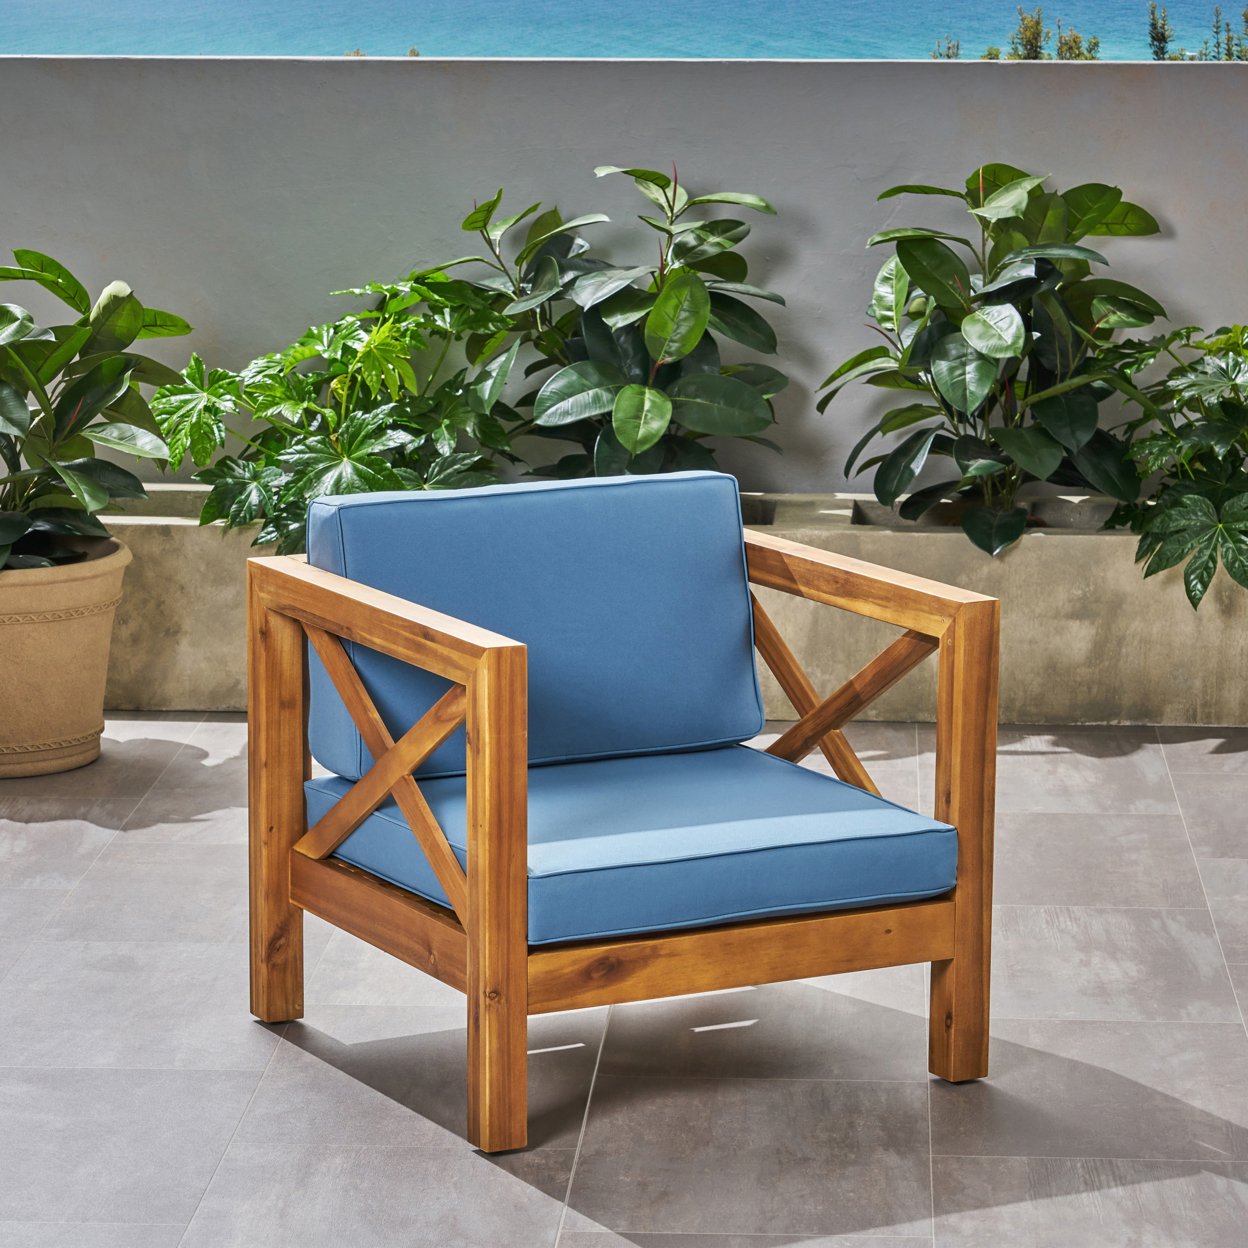 Indira Outdoor Acacia Wood Club Chair With Cushion - Teak Finish + Red